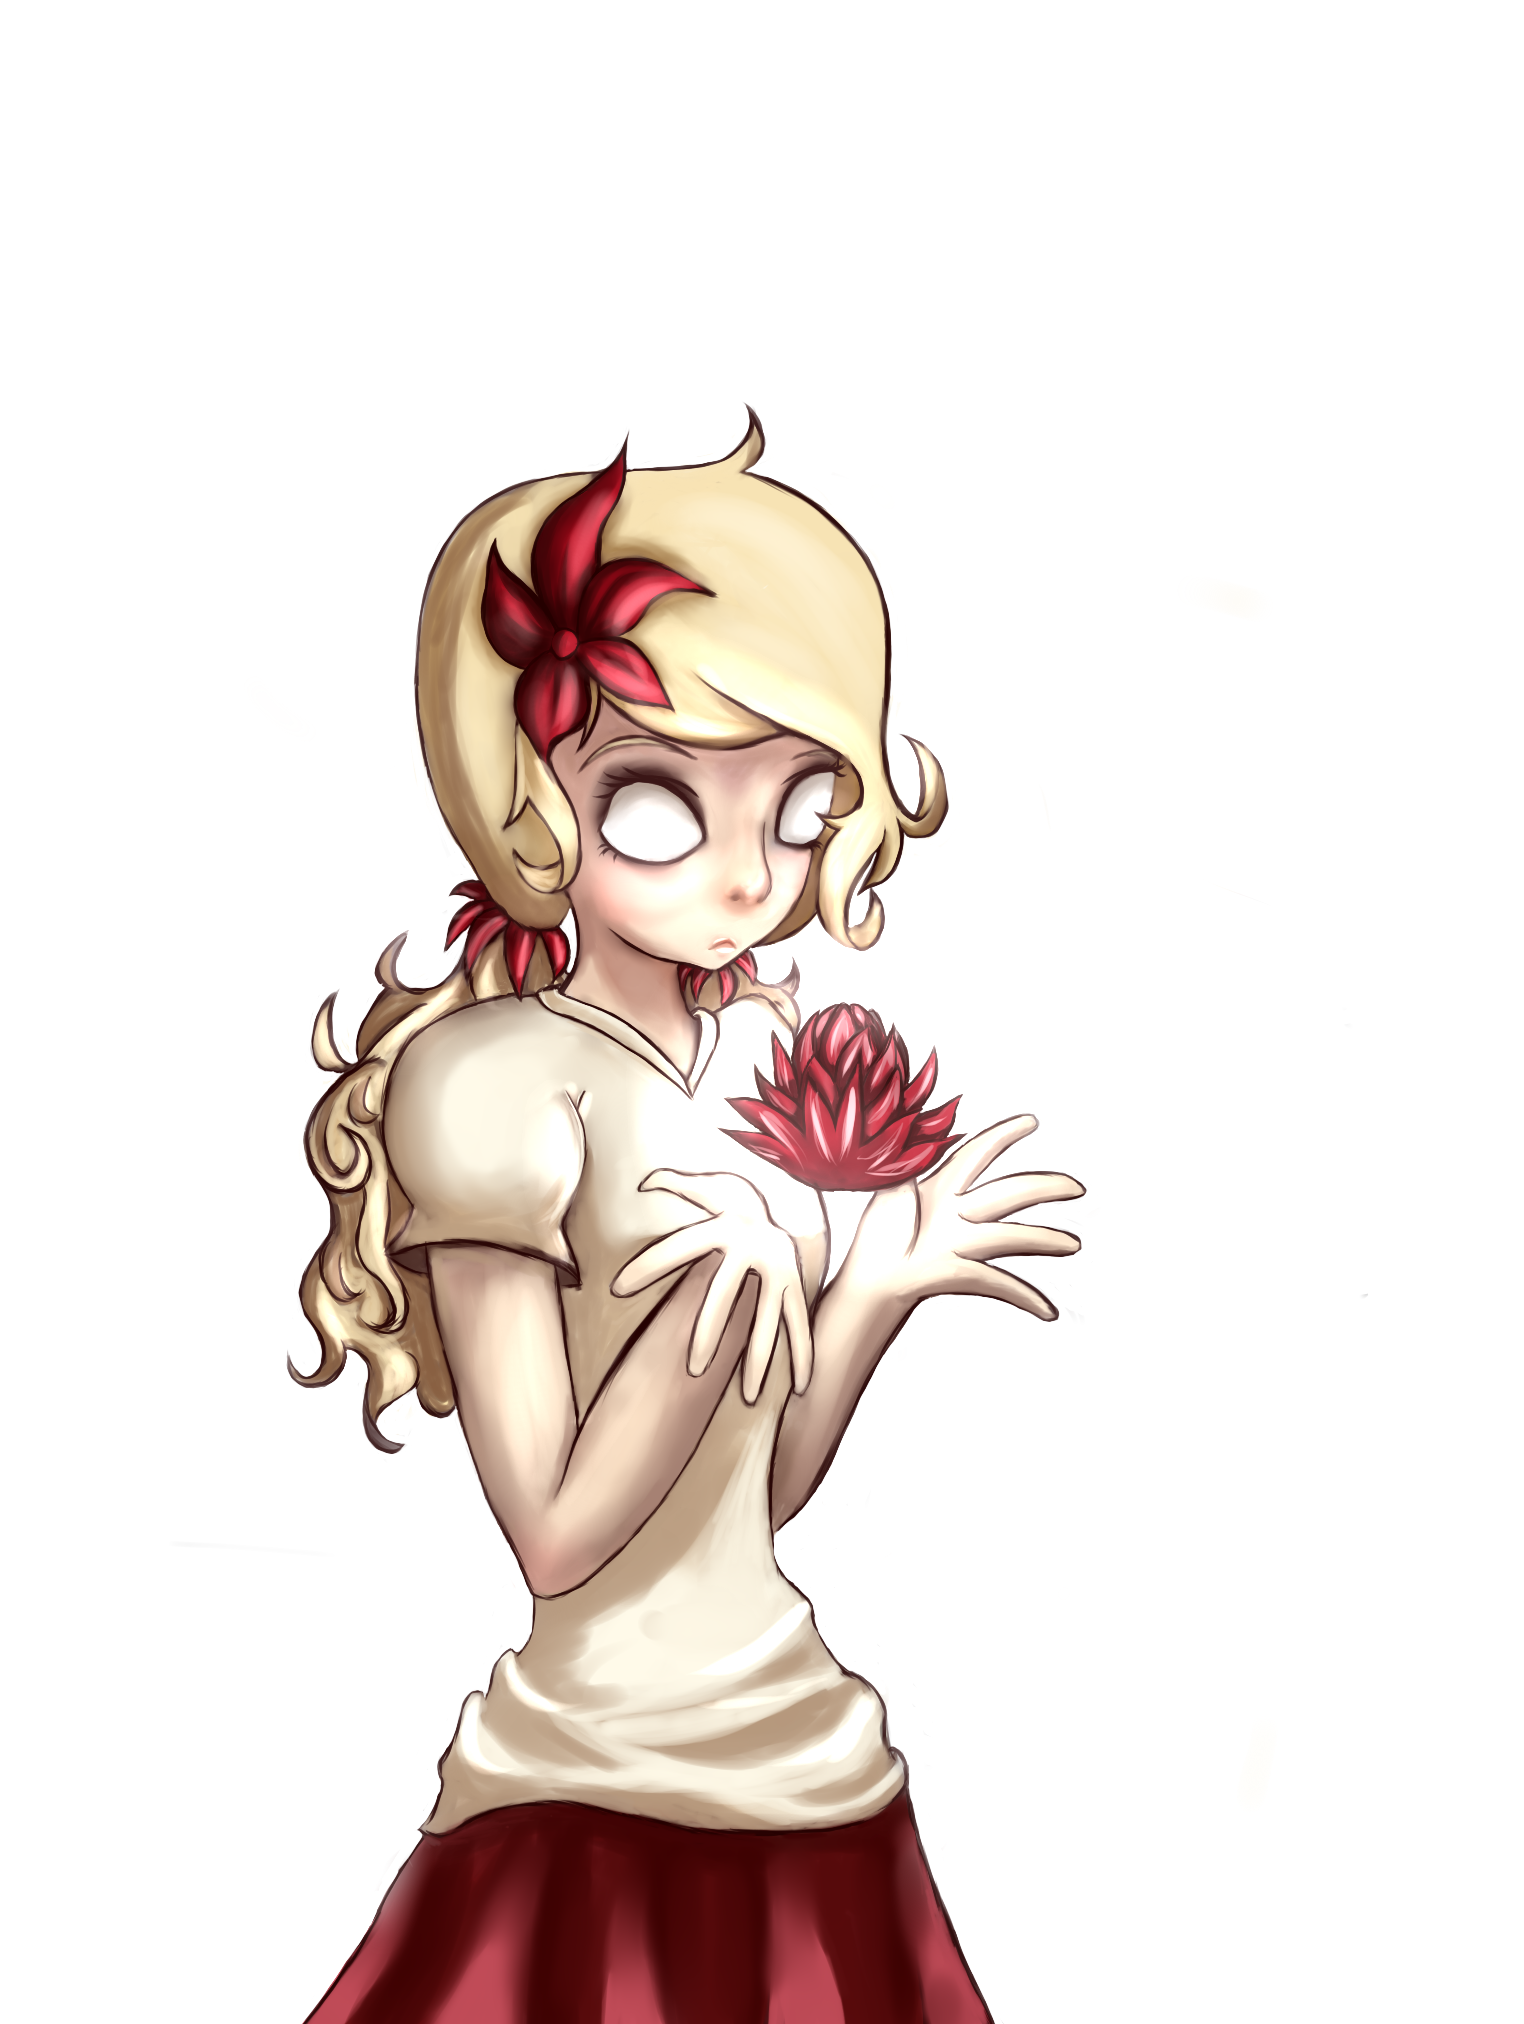 [Don't Starve] Wendy